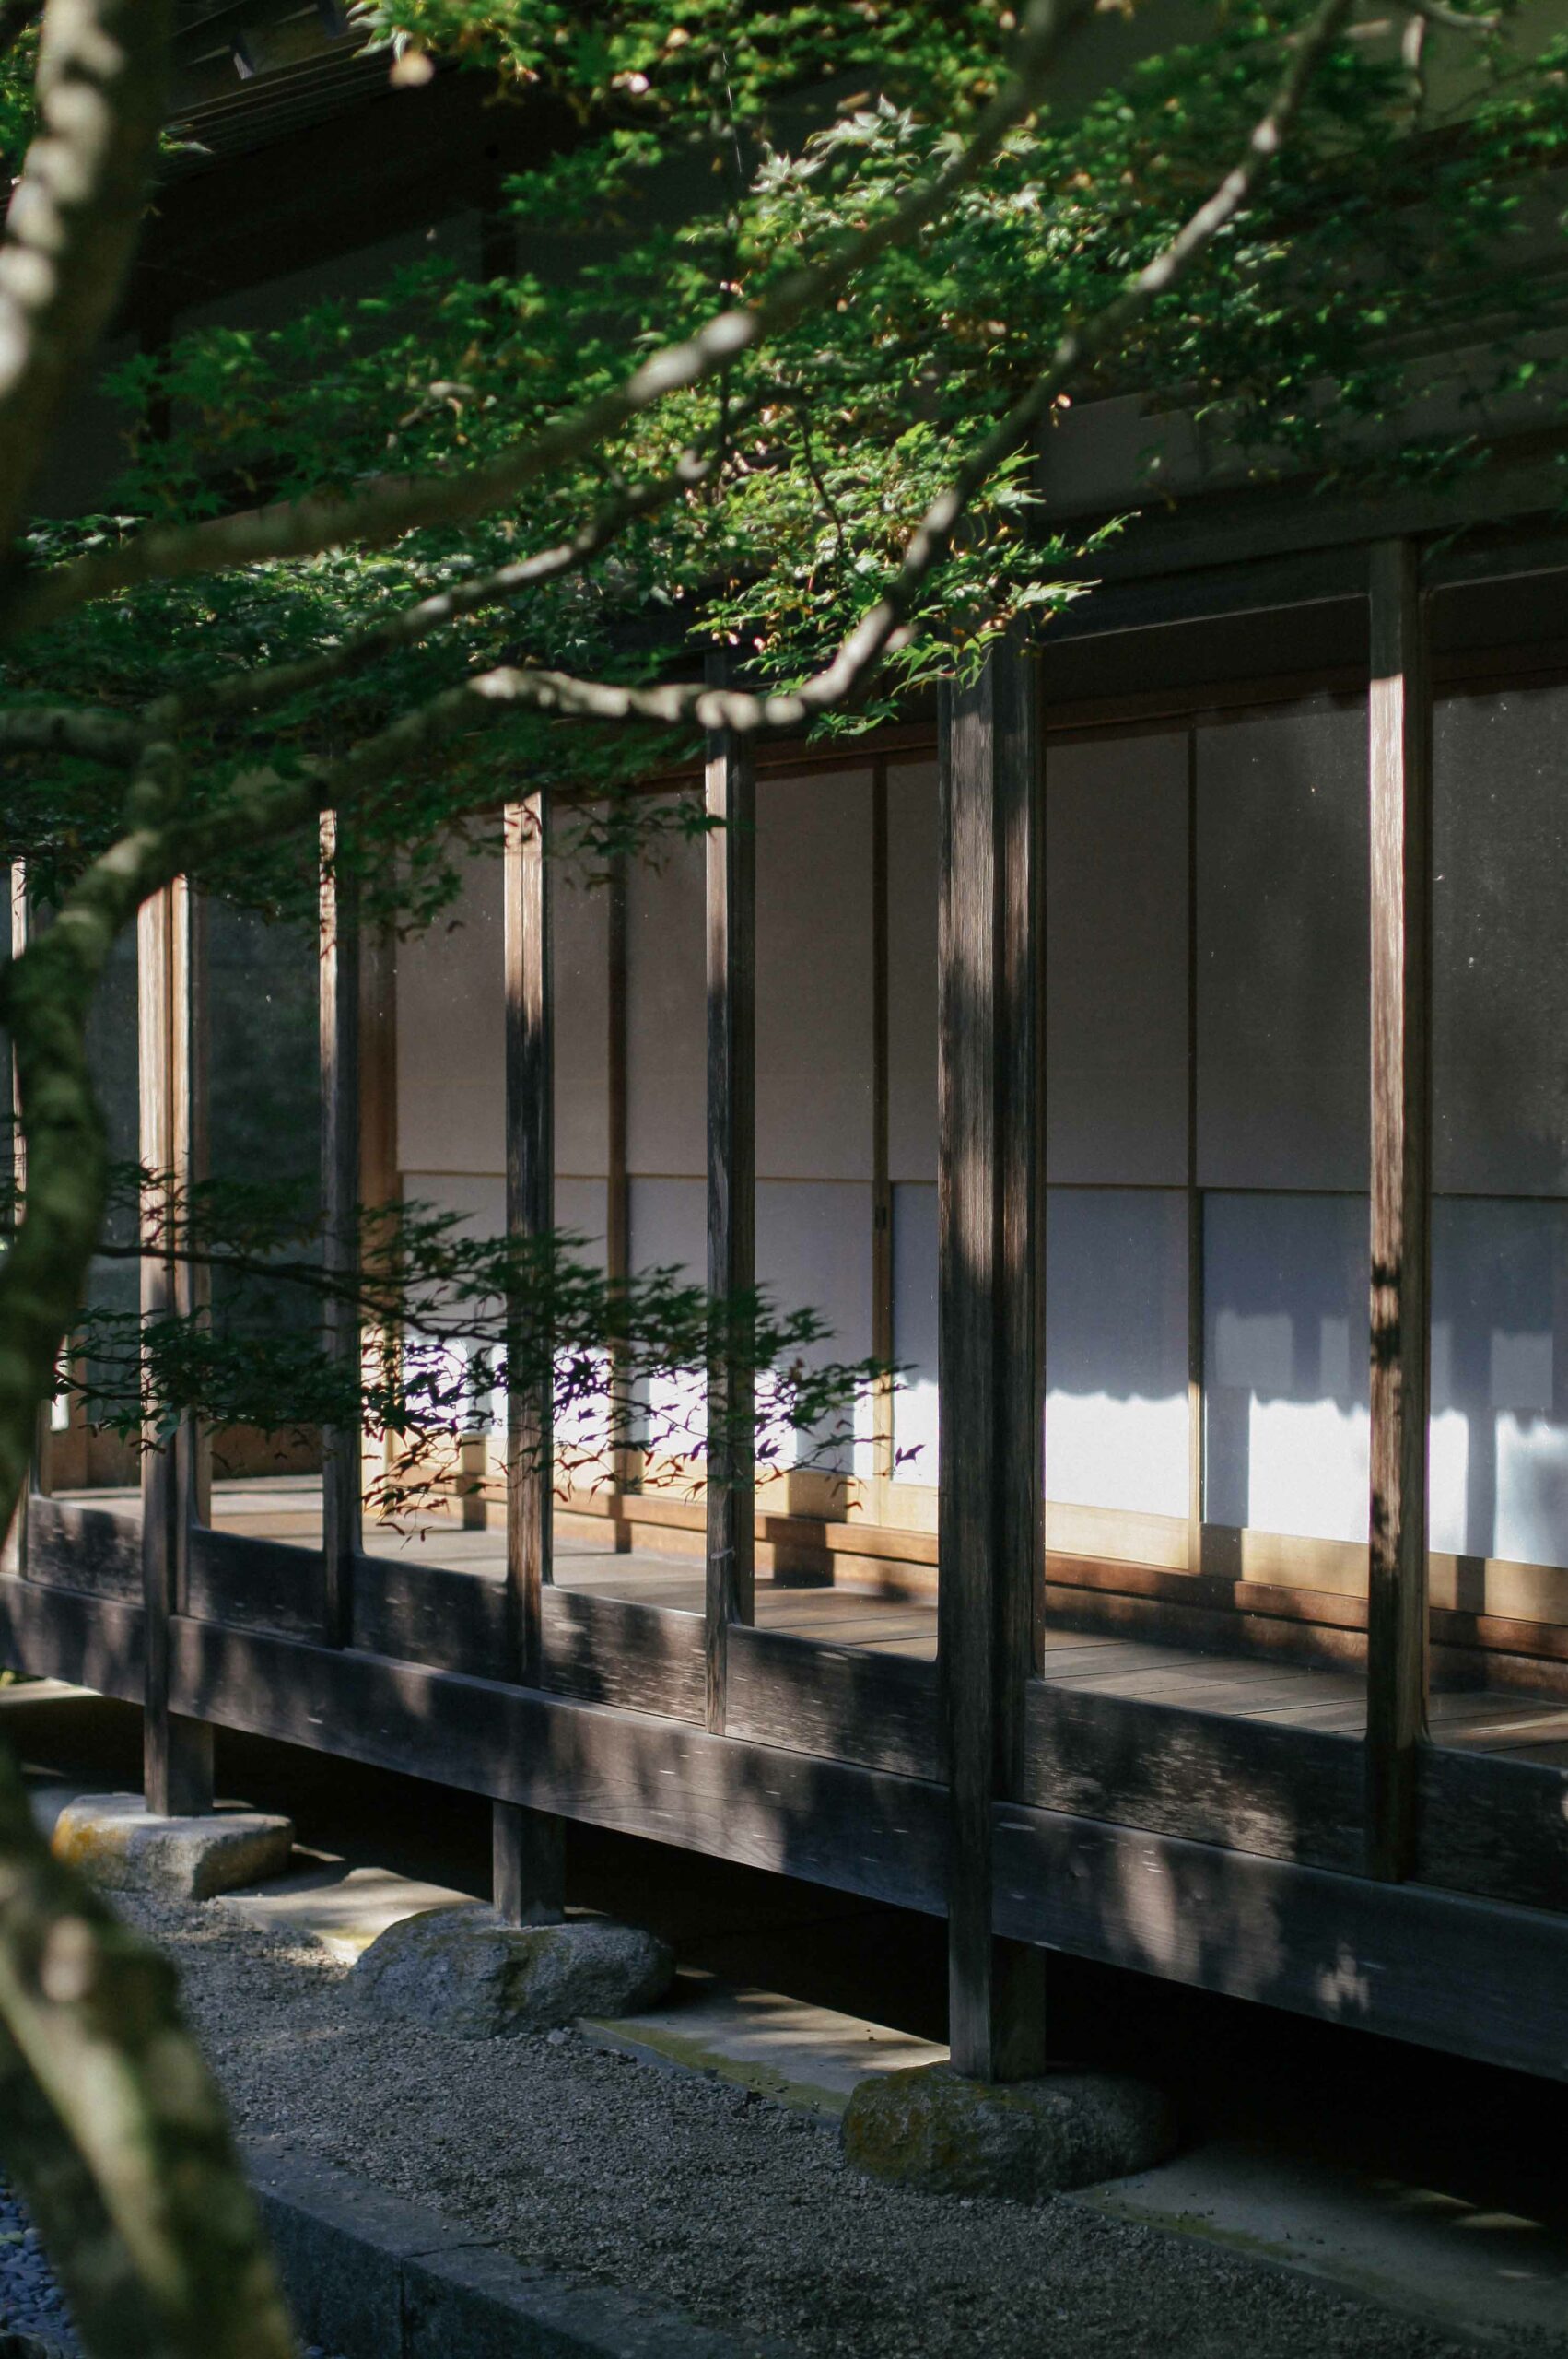 The temple's courtyard is peaceful, up in the depths of the quiet mountain.